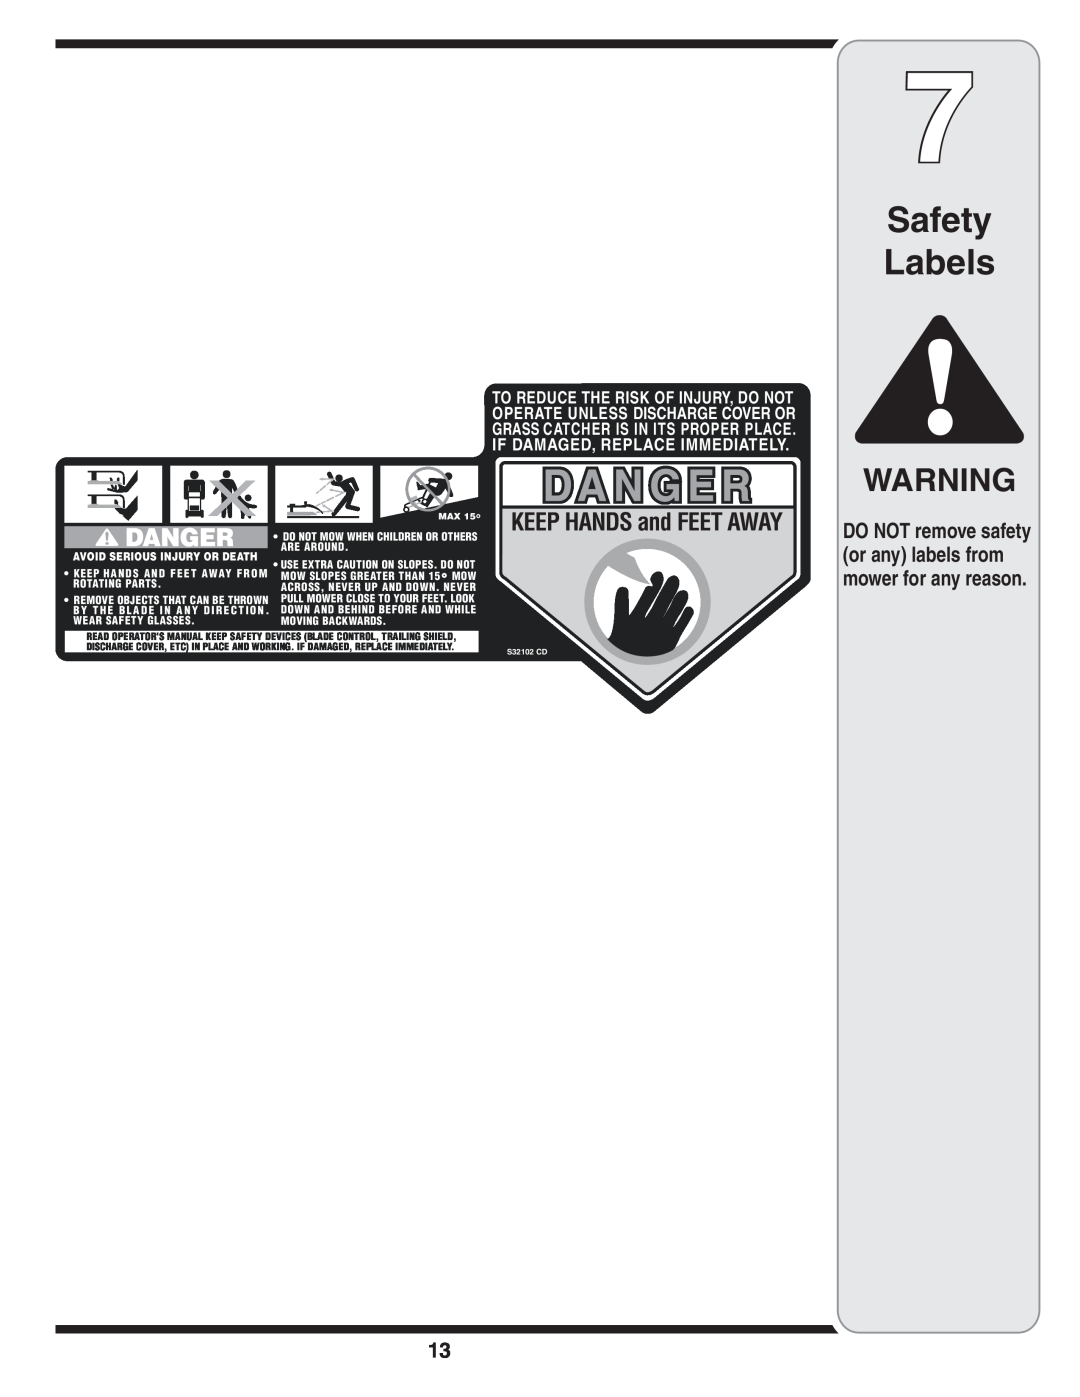 Yard-Man 430 warranty Safety Labels, DO NOT remove safety or any labels from mower for any reason 